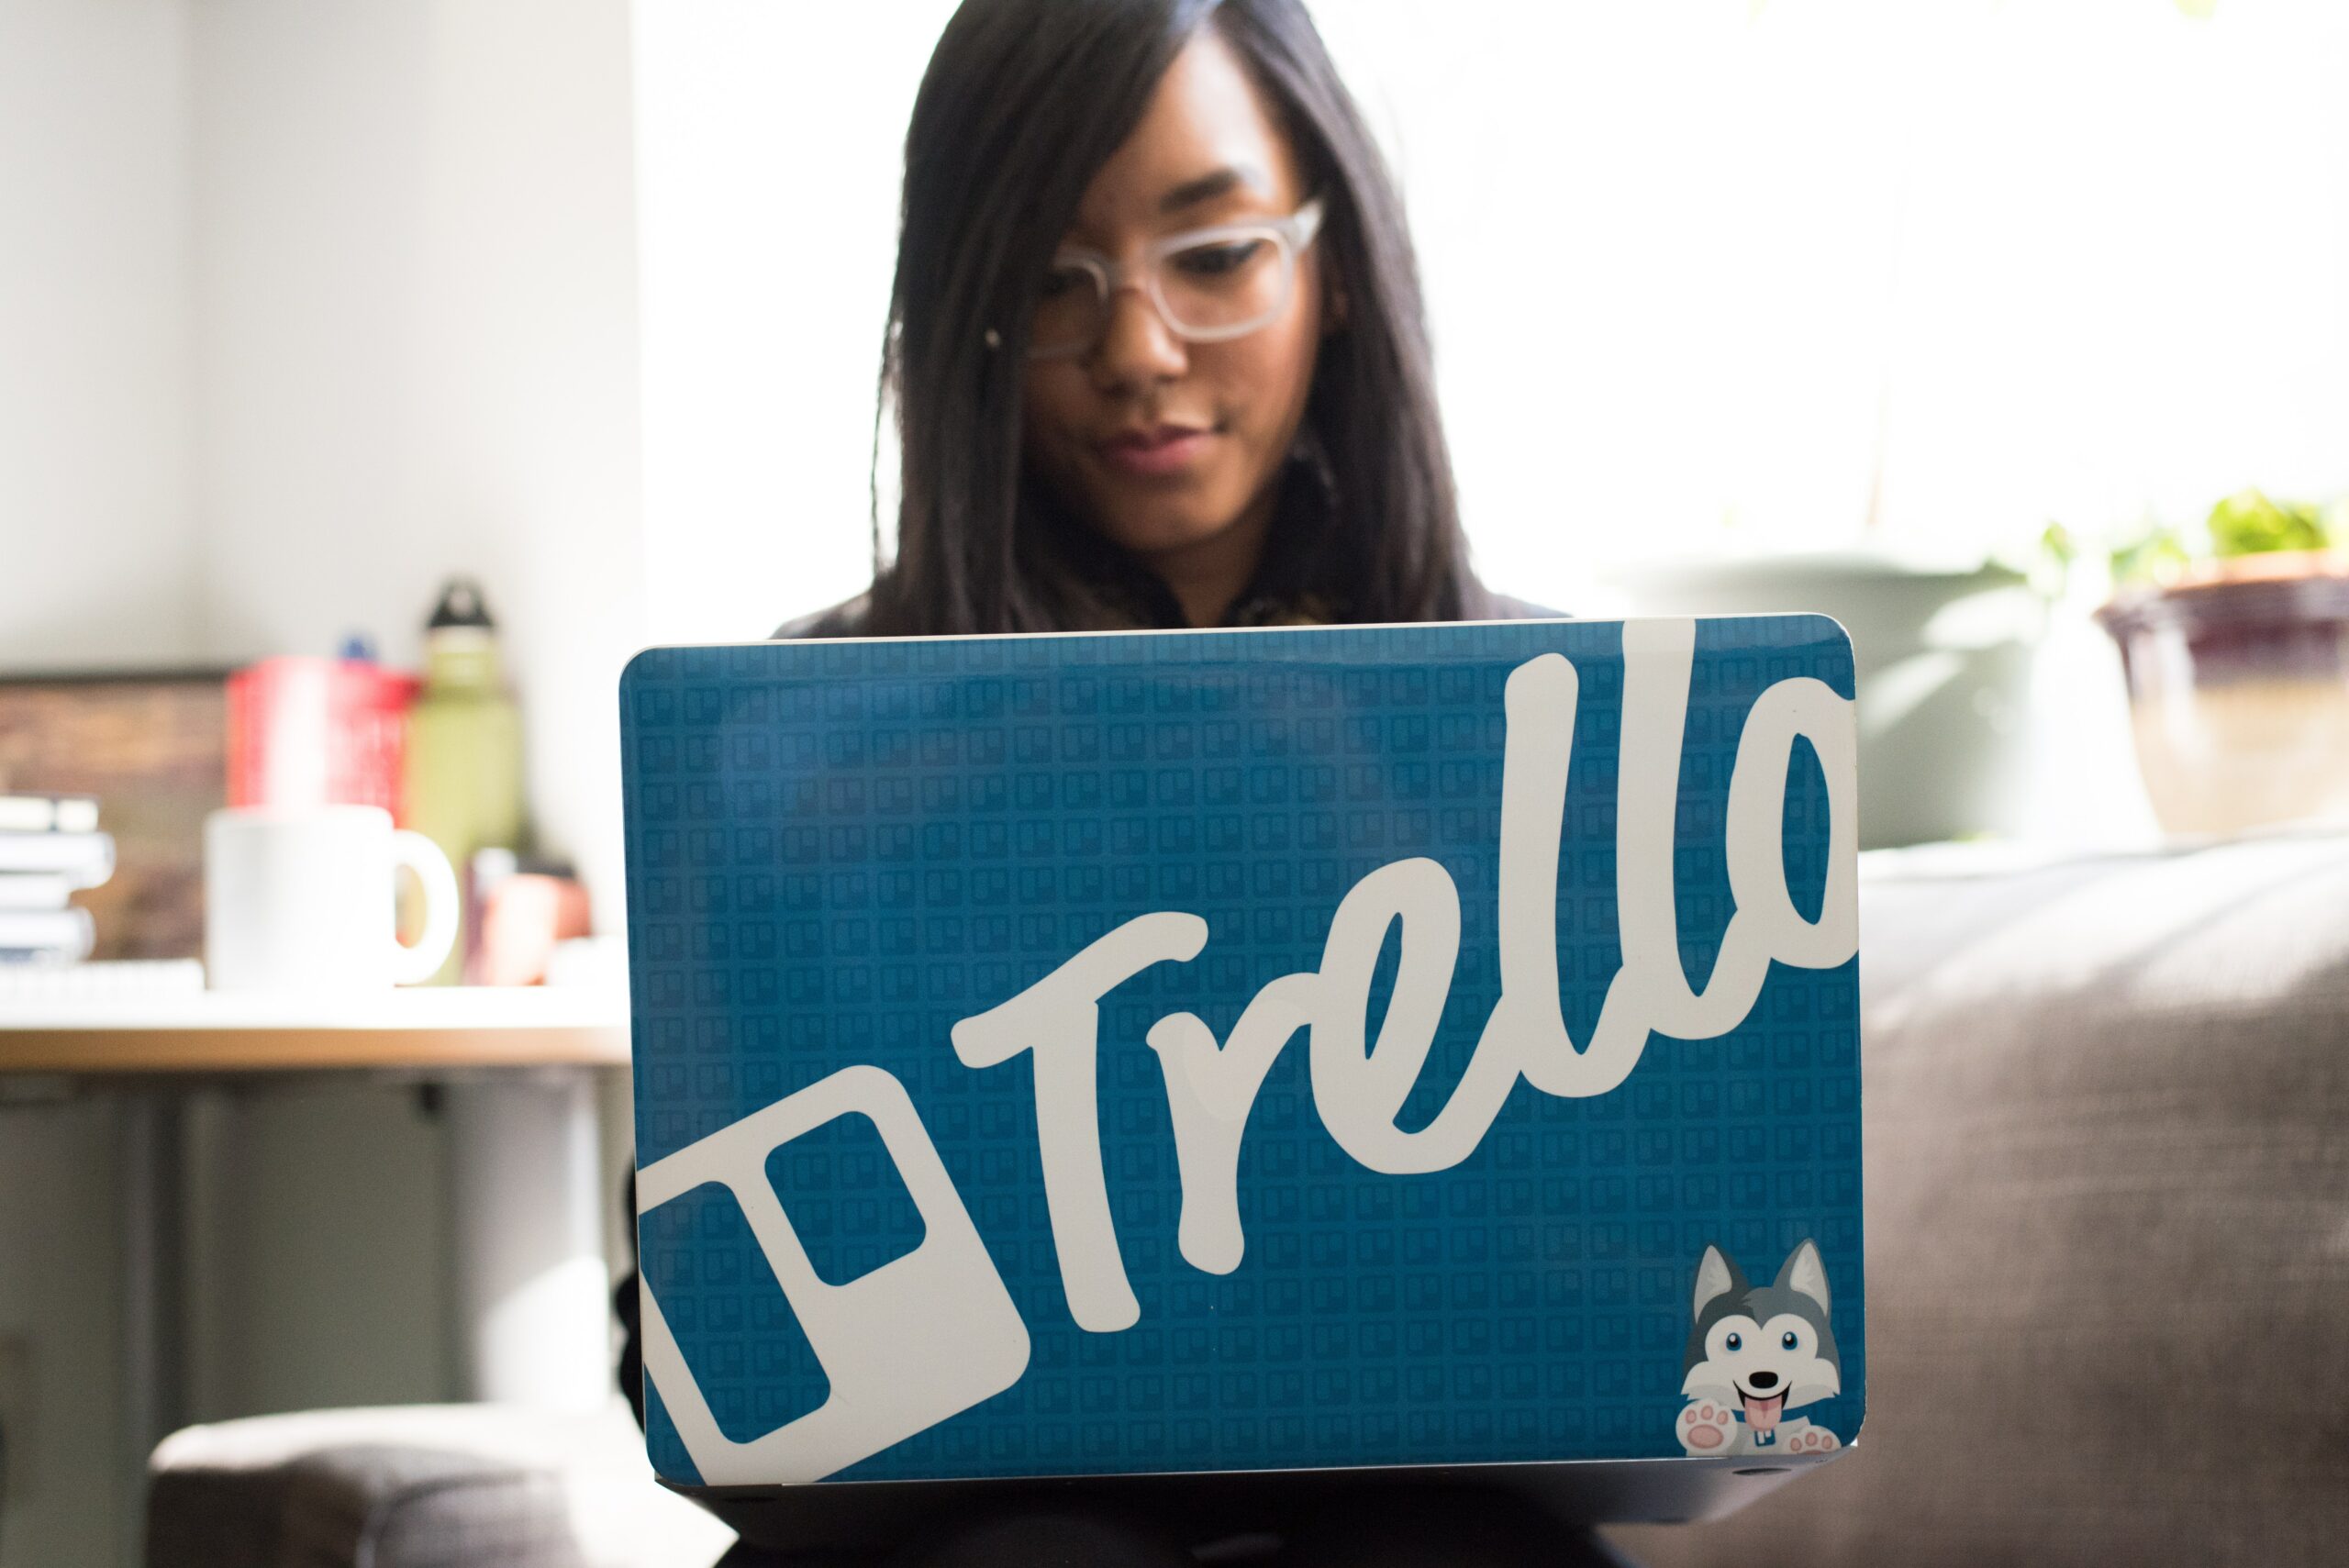 Trello is one of the best project management apps for a freelancer